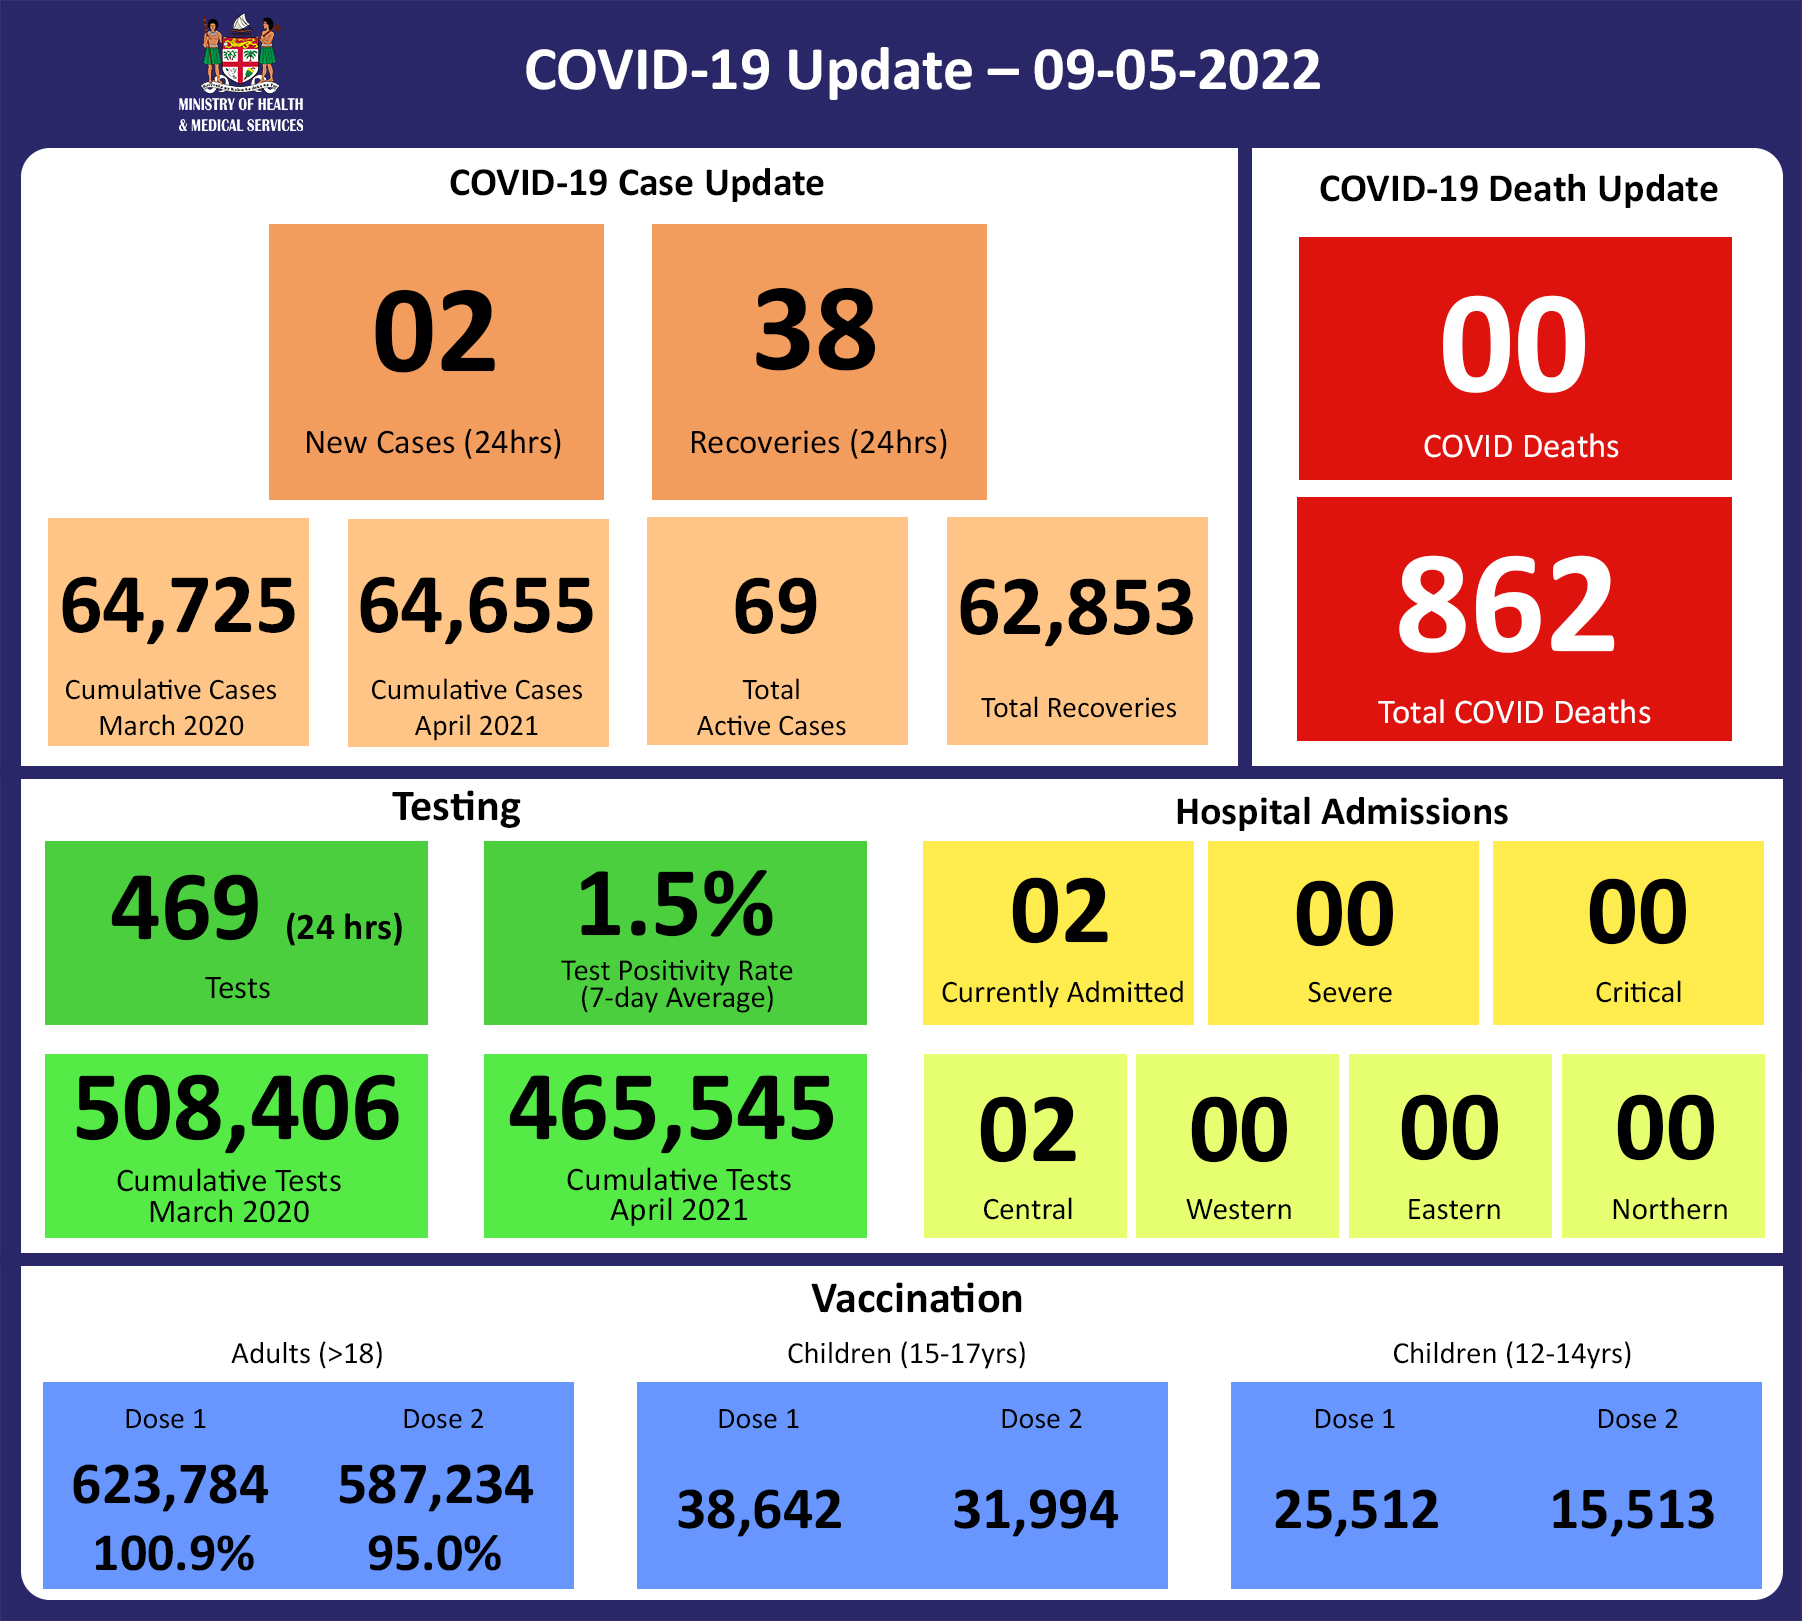 COVID-19 Update 09-05-2022 - MINISTRY OF HEALTH & MEDICAL SERVICES